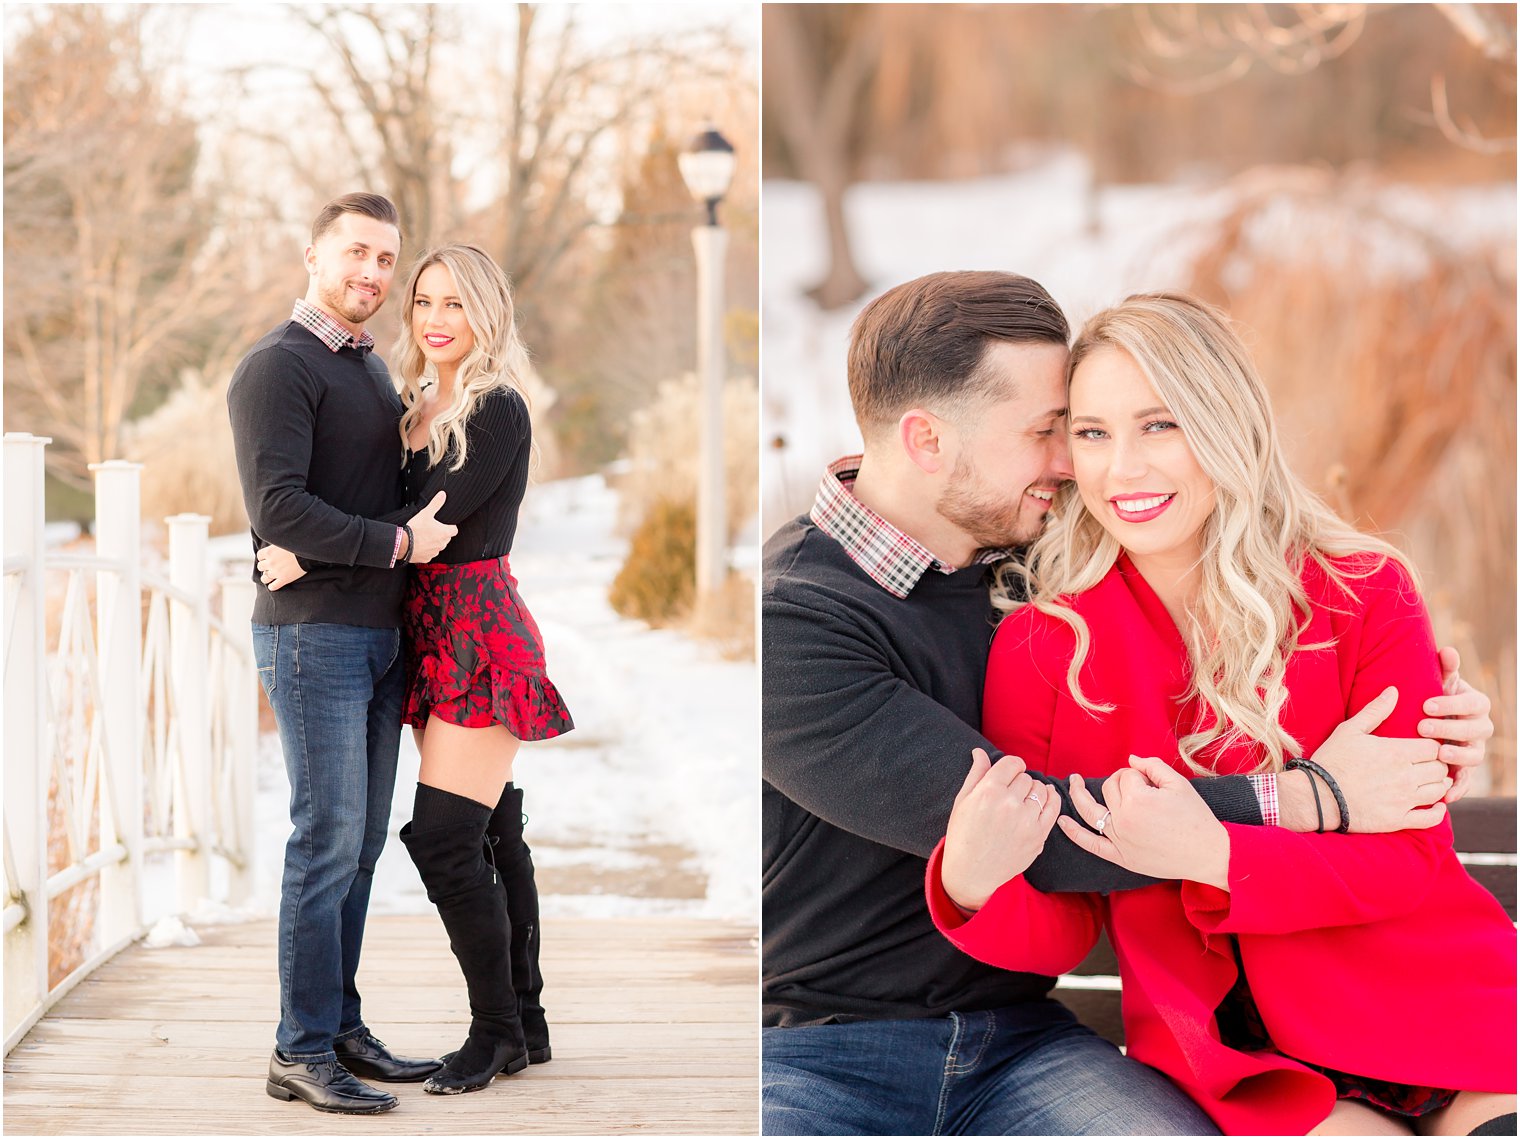 Engagement session at Sayen Gardens in the snow